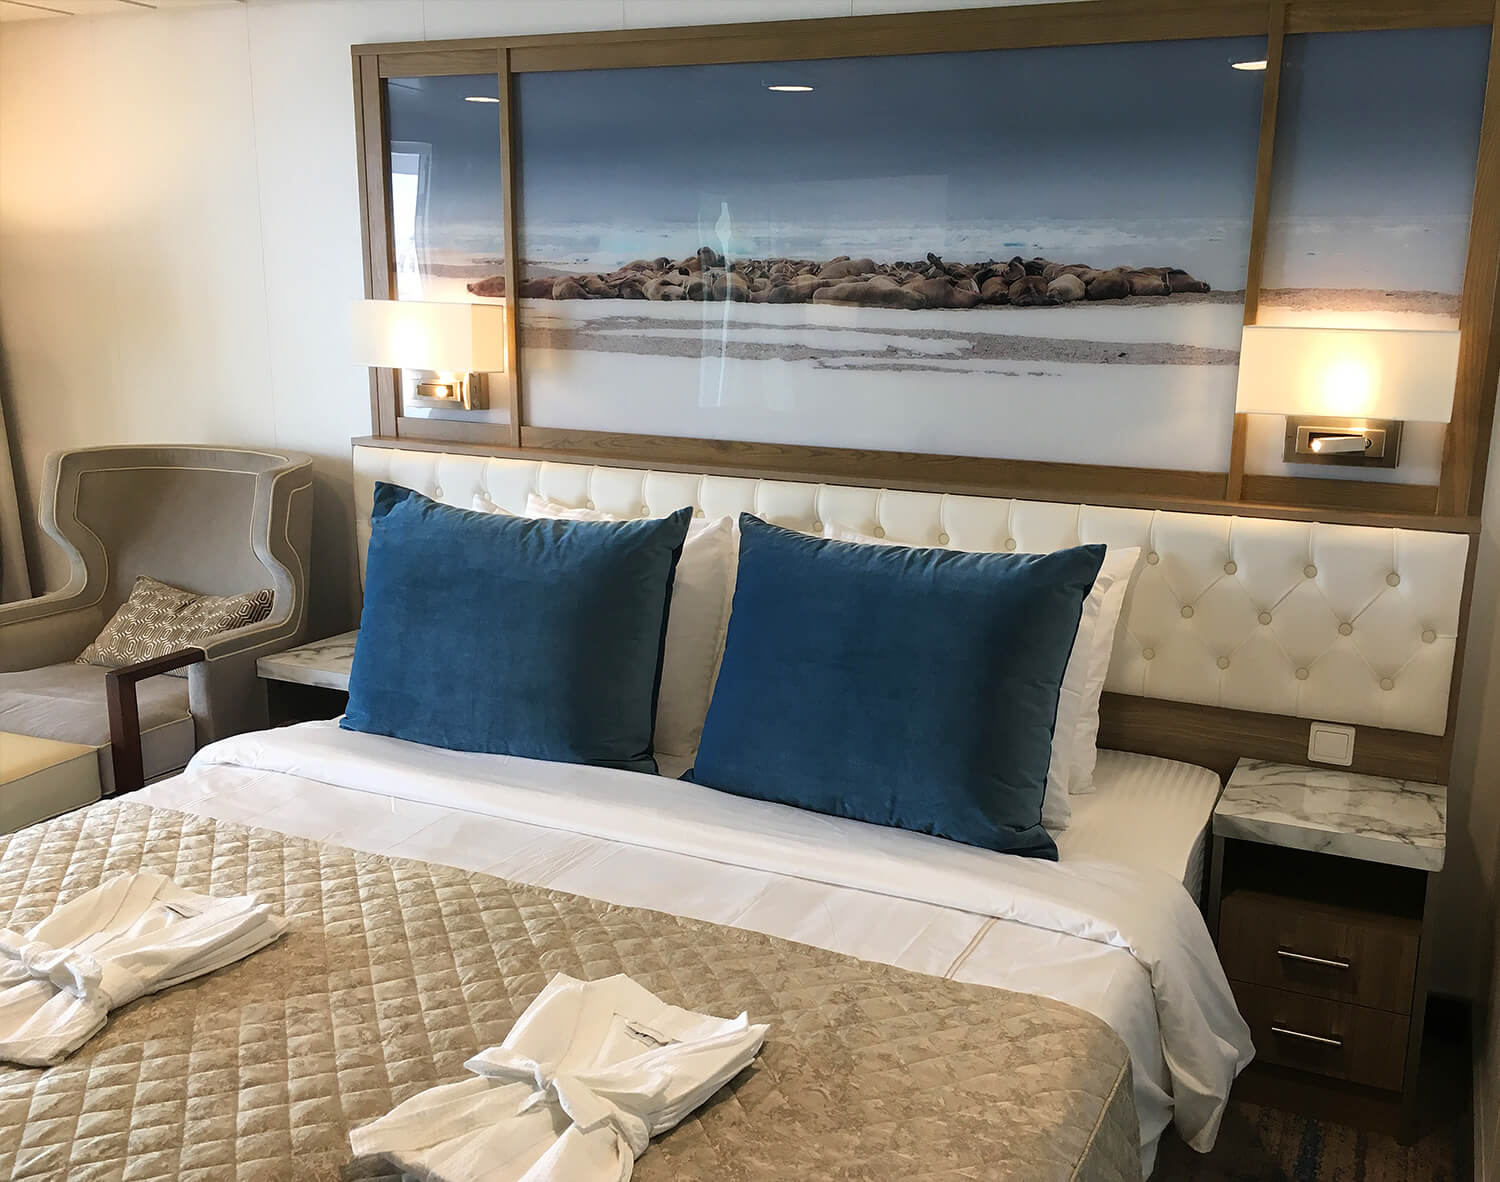 A bed with mirror and side tables in a cruise ship cabin